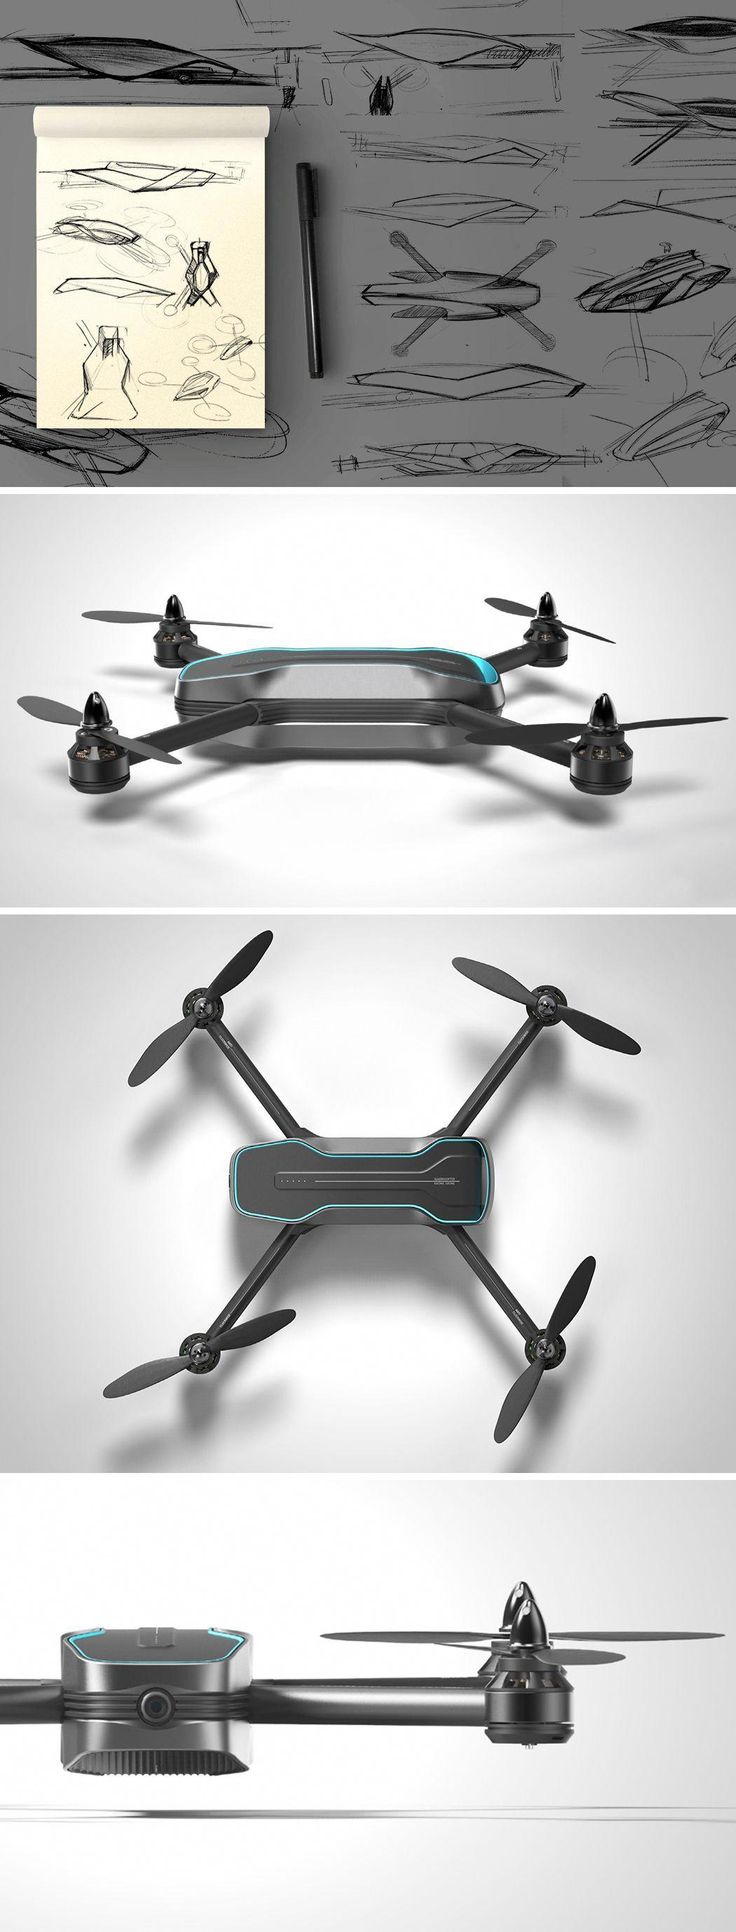 The airX drone combines the best of customizability and efficient construction to make it within reach for just about anybody. #Gadgets #droneaerialphotography